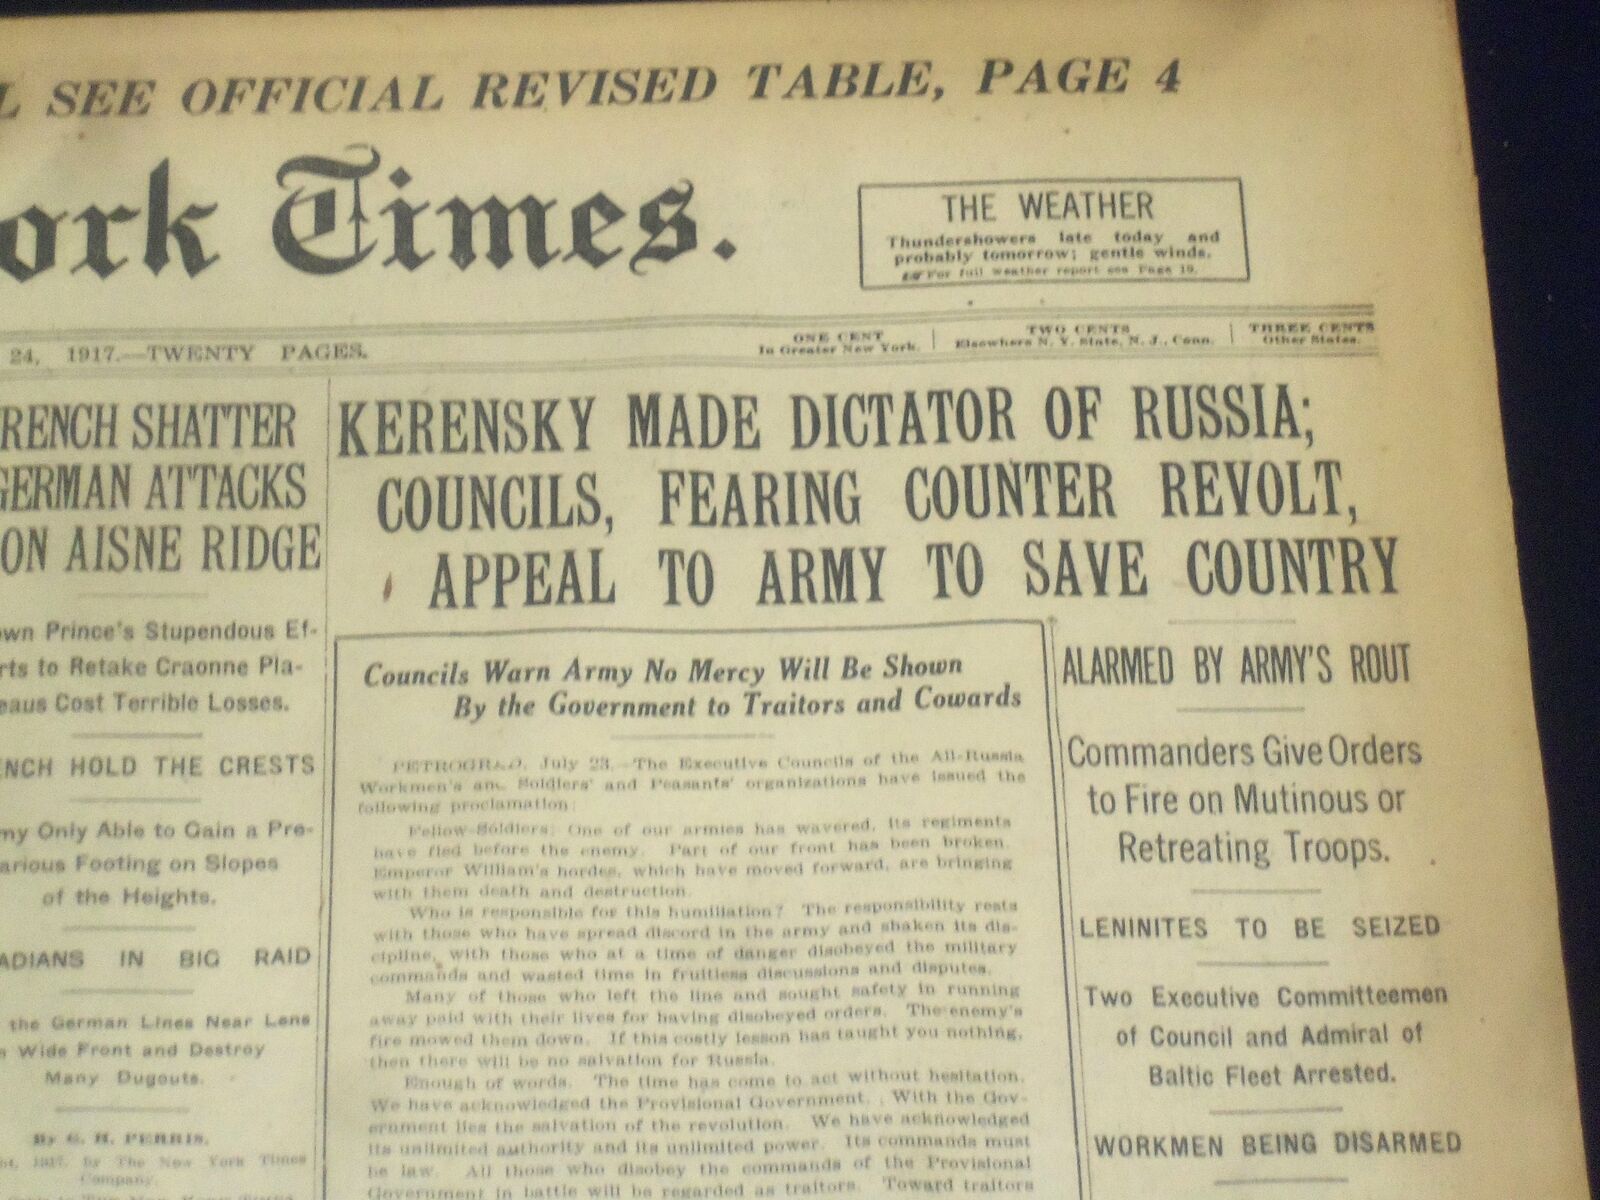 1917 JULY 24 NEW YORK TIMES - KERENSKY MADE DICTATOR OF RUSSIA - NT 9314